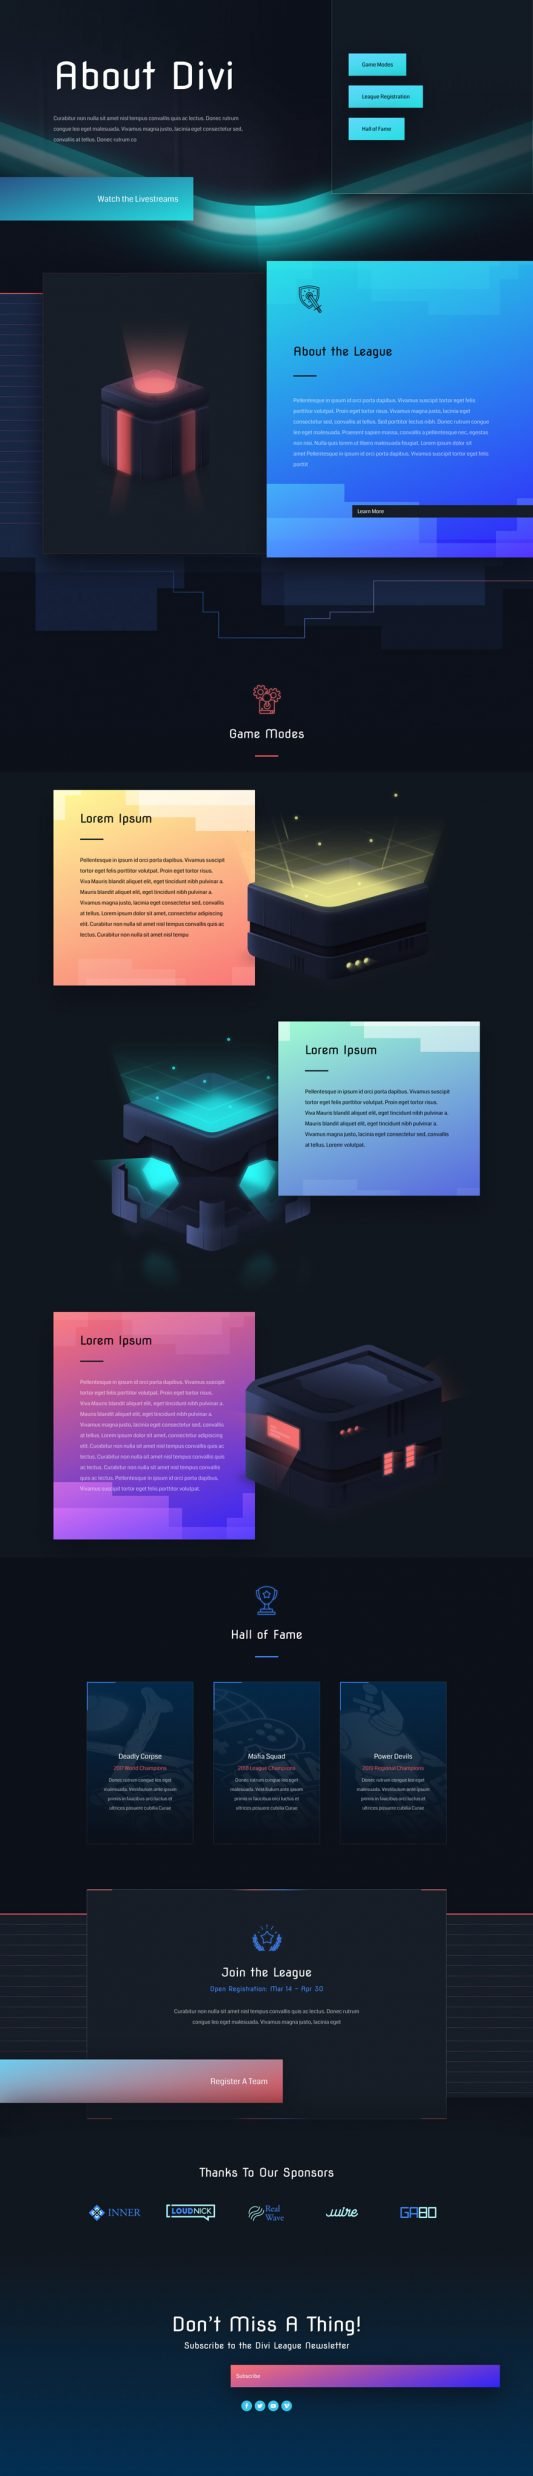 Esports About Page Divi Layout by Elegant Themes